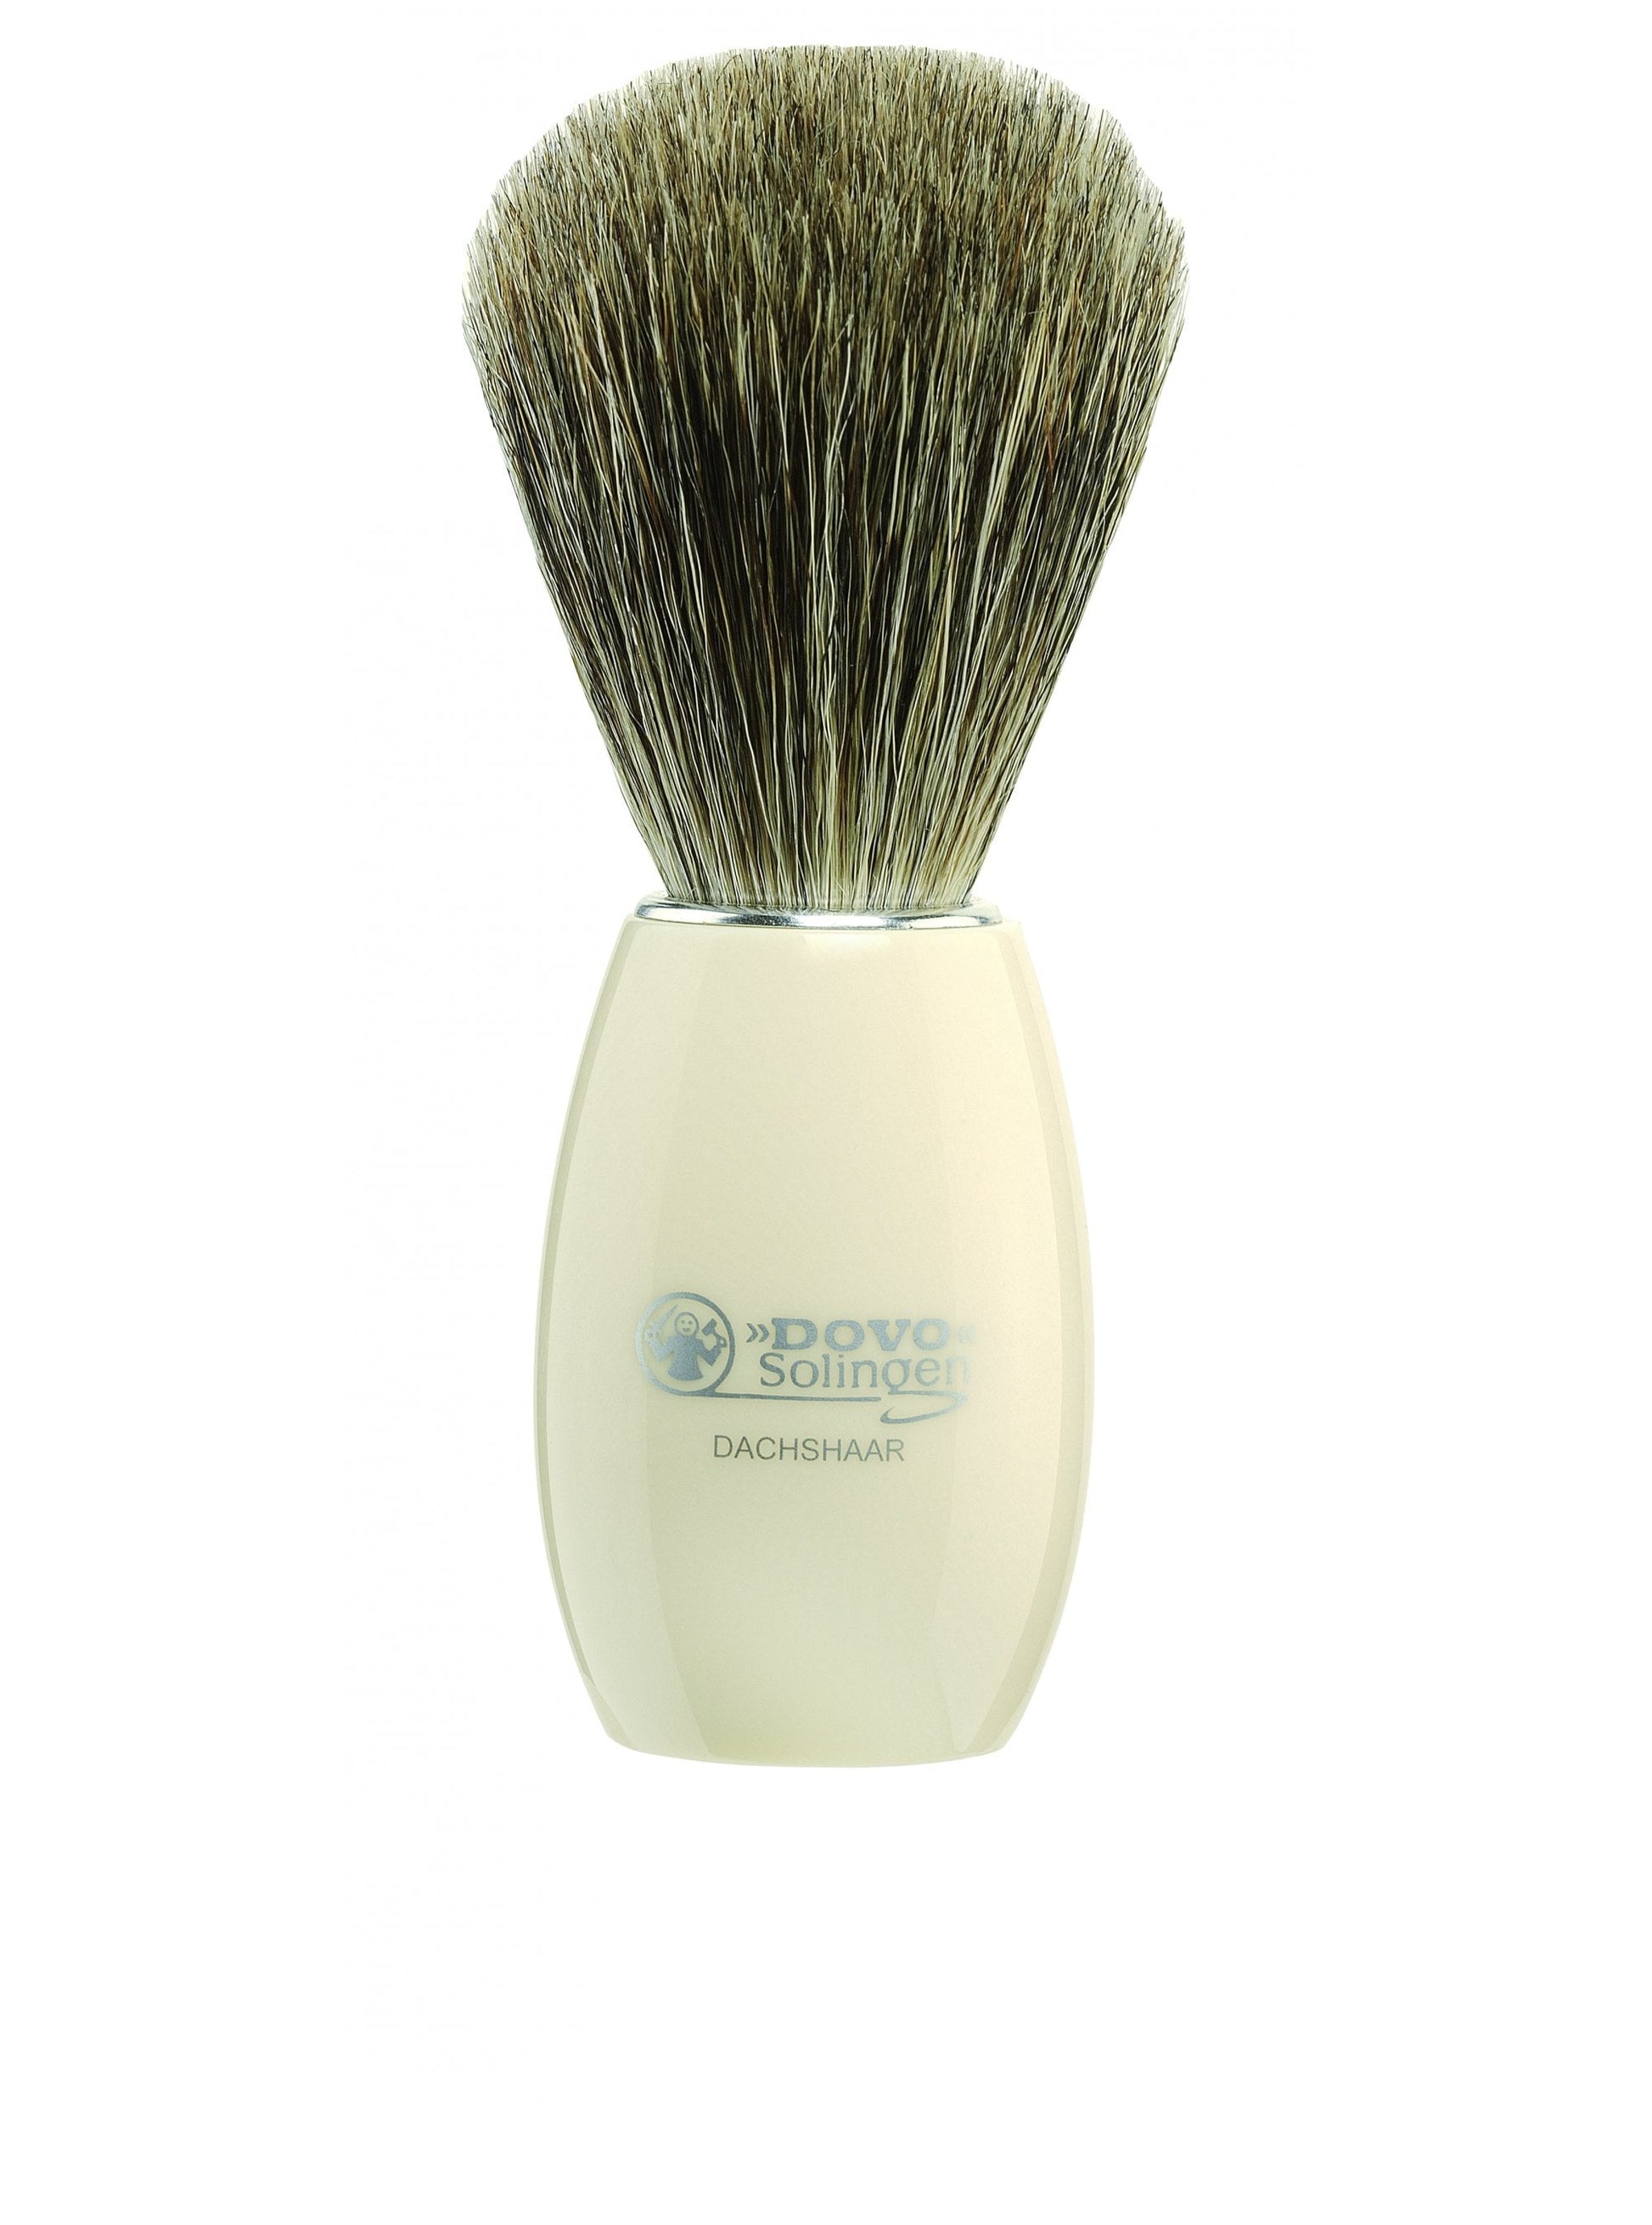 Dovo Solingen Pure Badger Shaving Brush with Ivory Coloured Handle 918-118